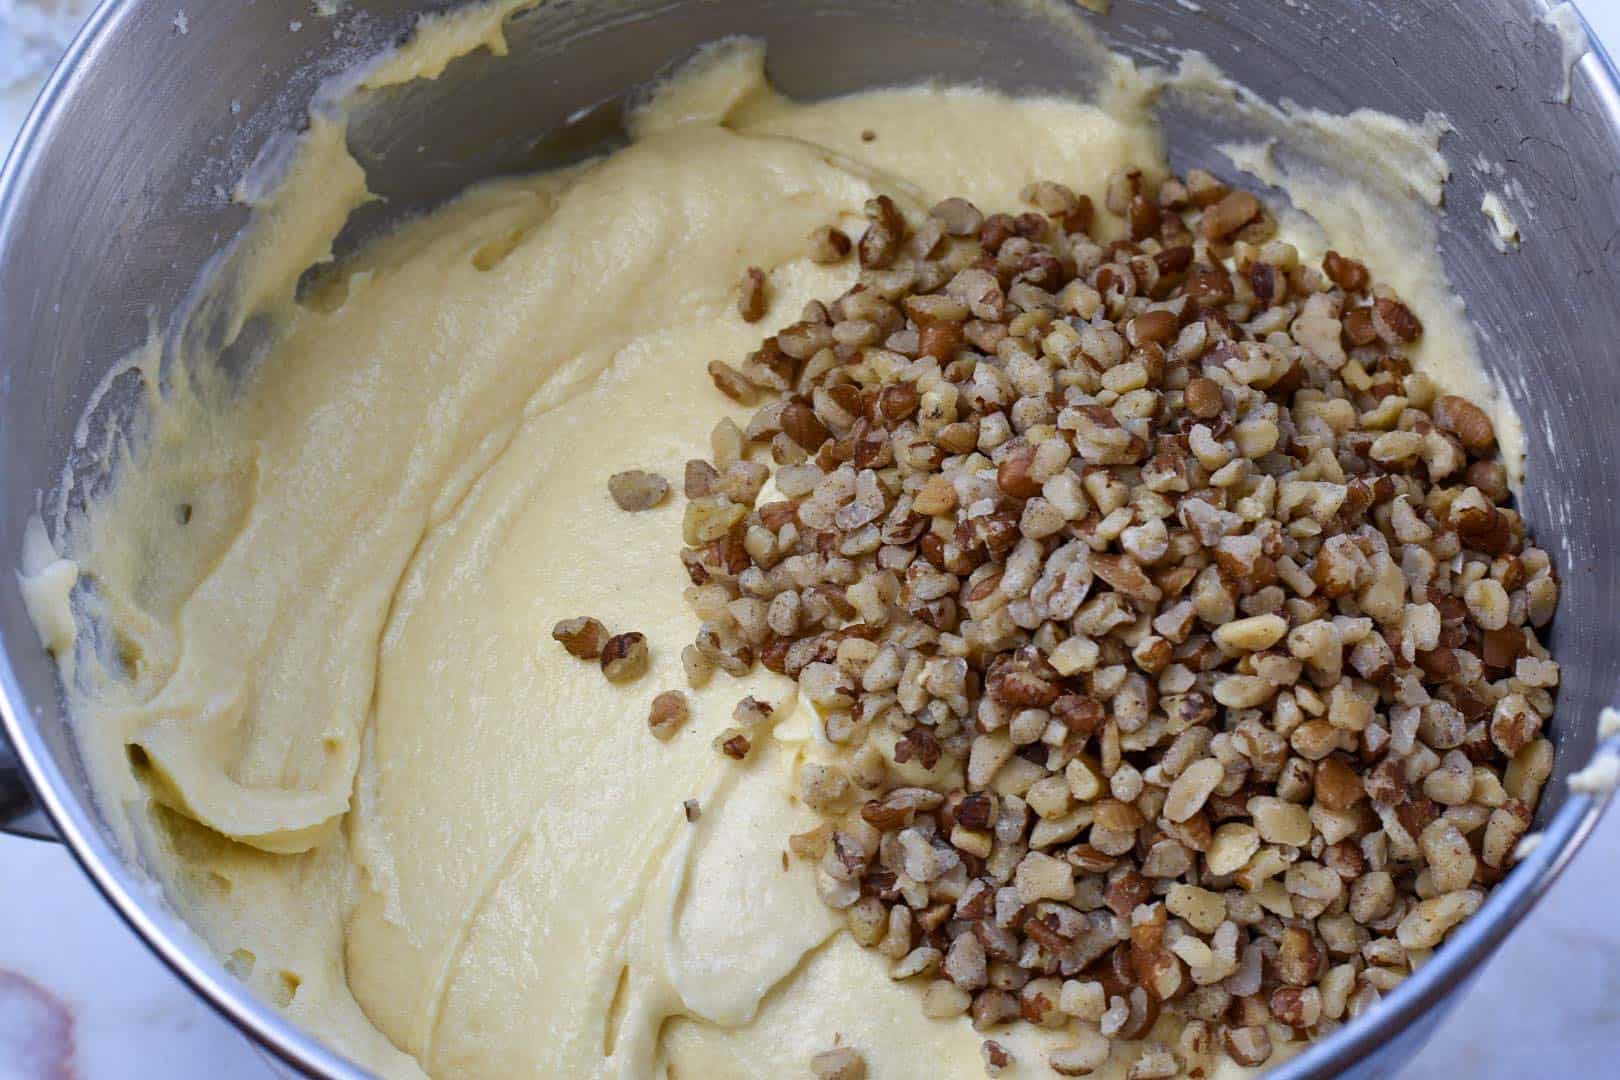 cake batter in mixing bowl with black walnuts